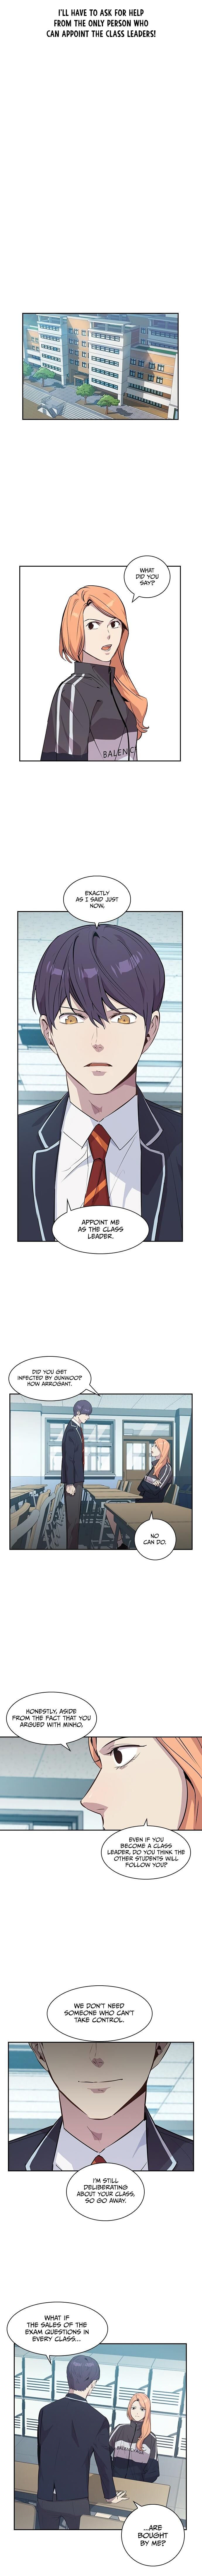 the-world-is-money-and-power-chap-34-9